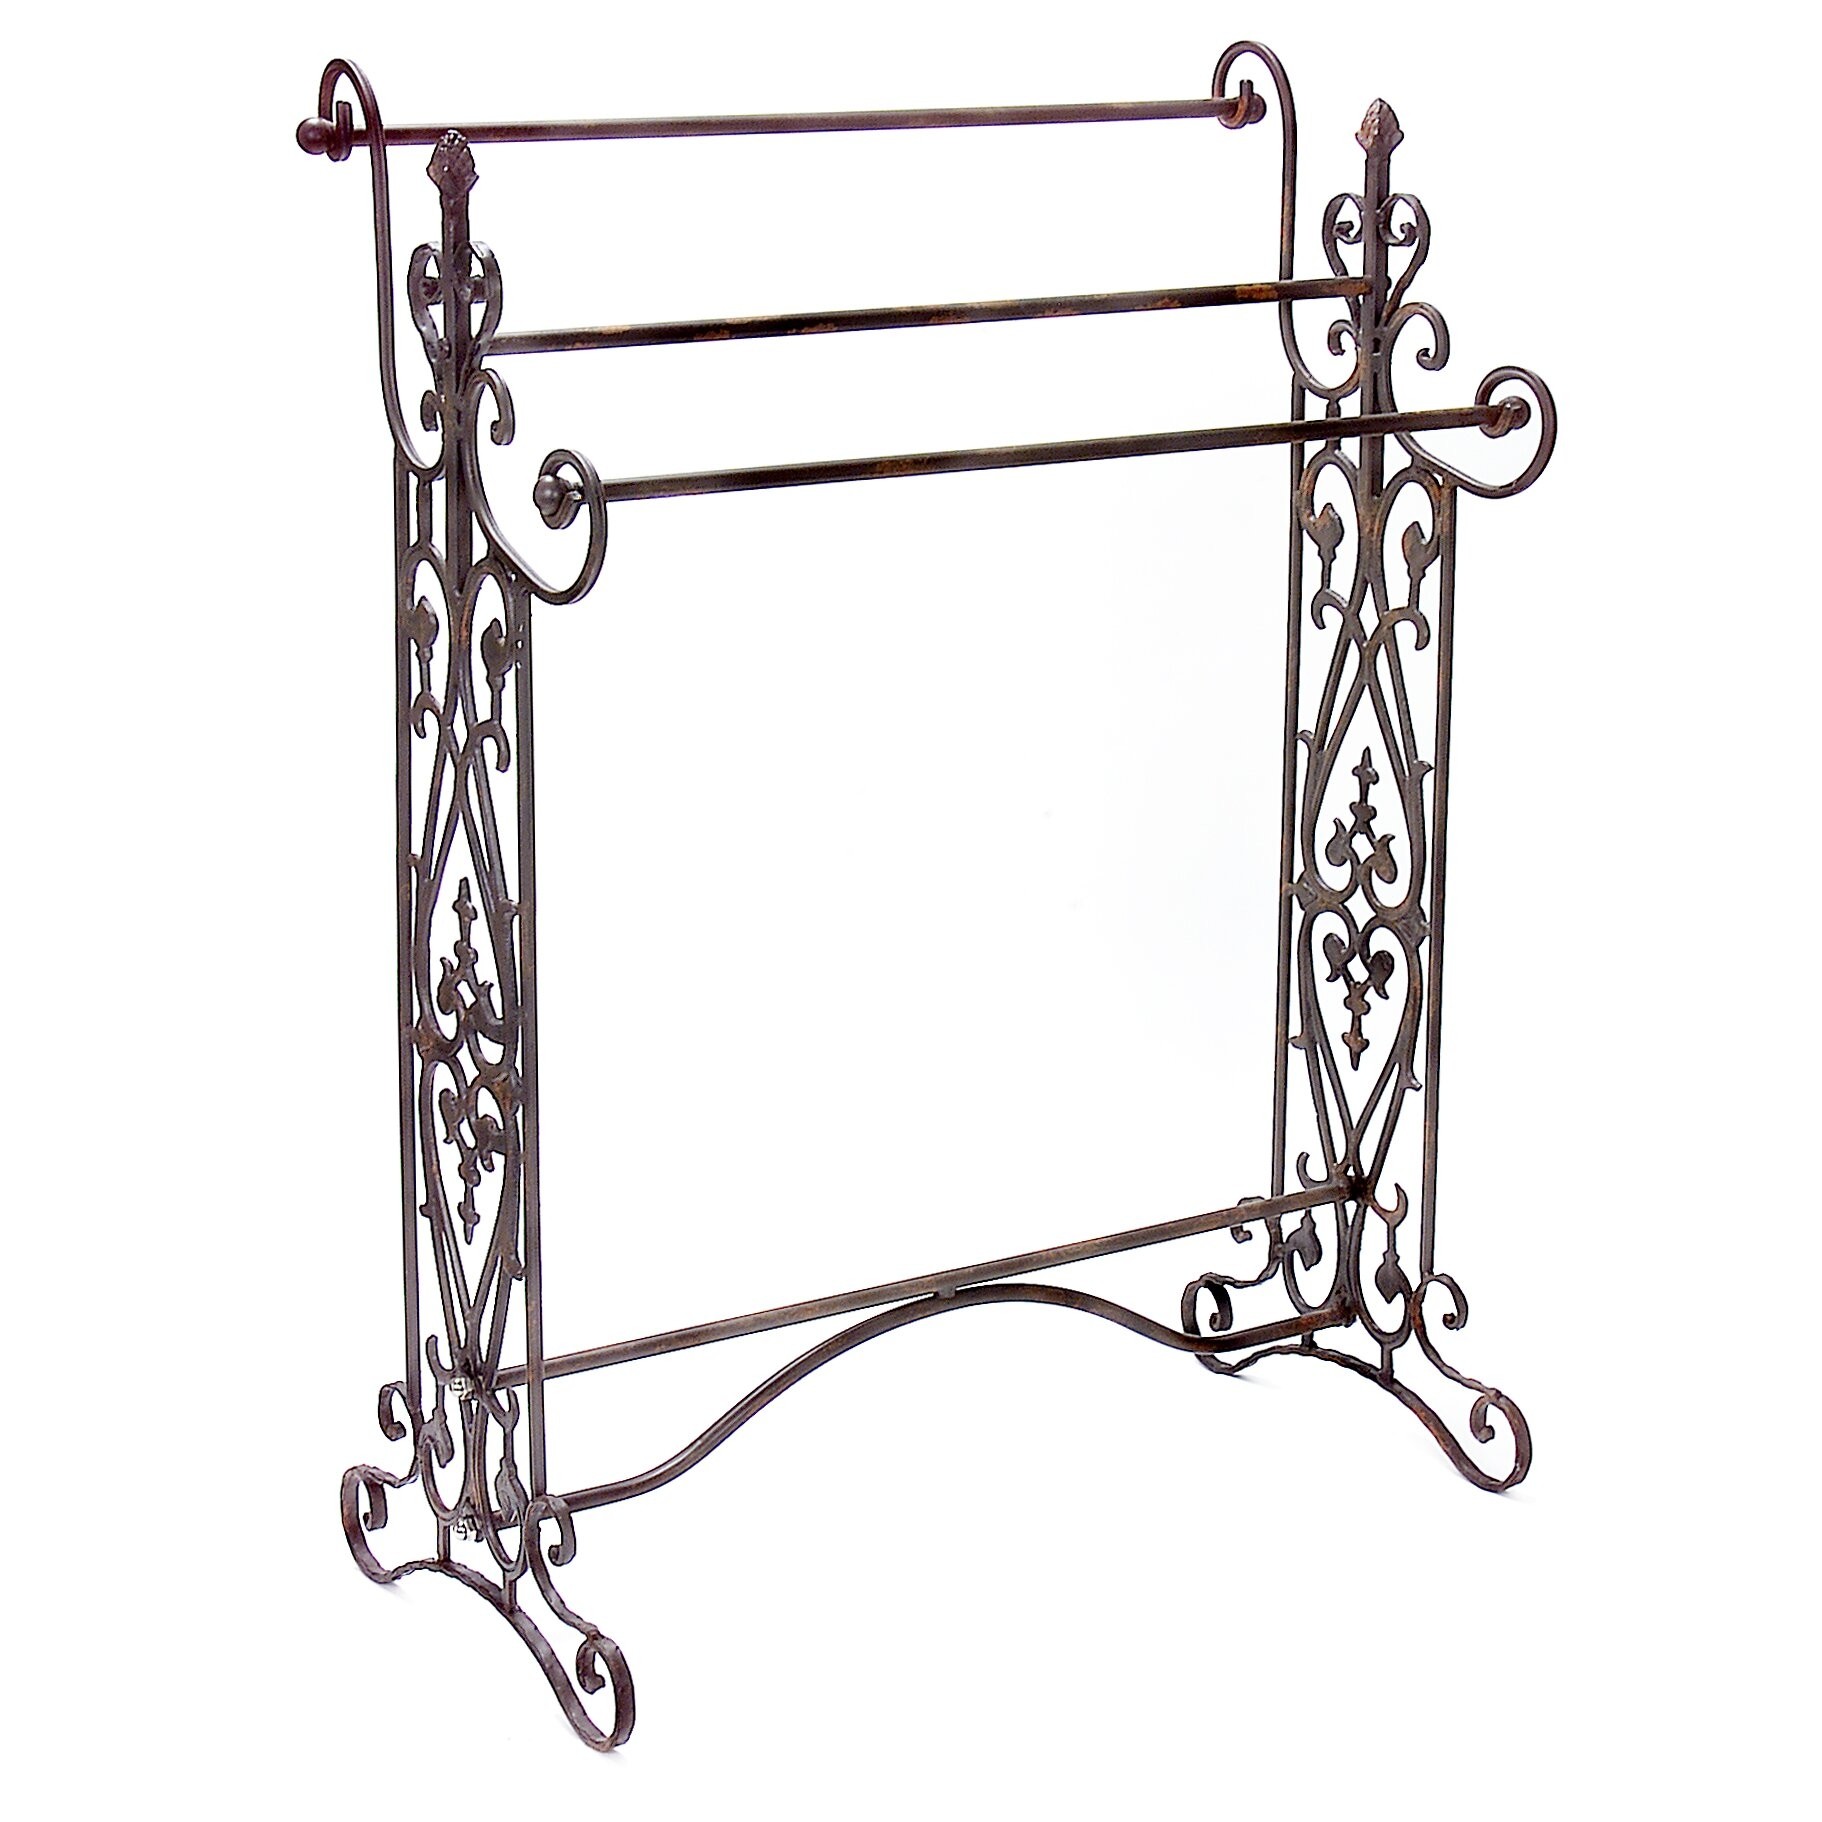 Details about   Victorian Trading Co Ornate Wrought Iron Victorian Quilt Rack 